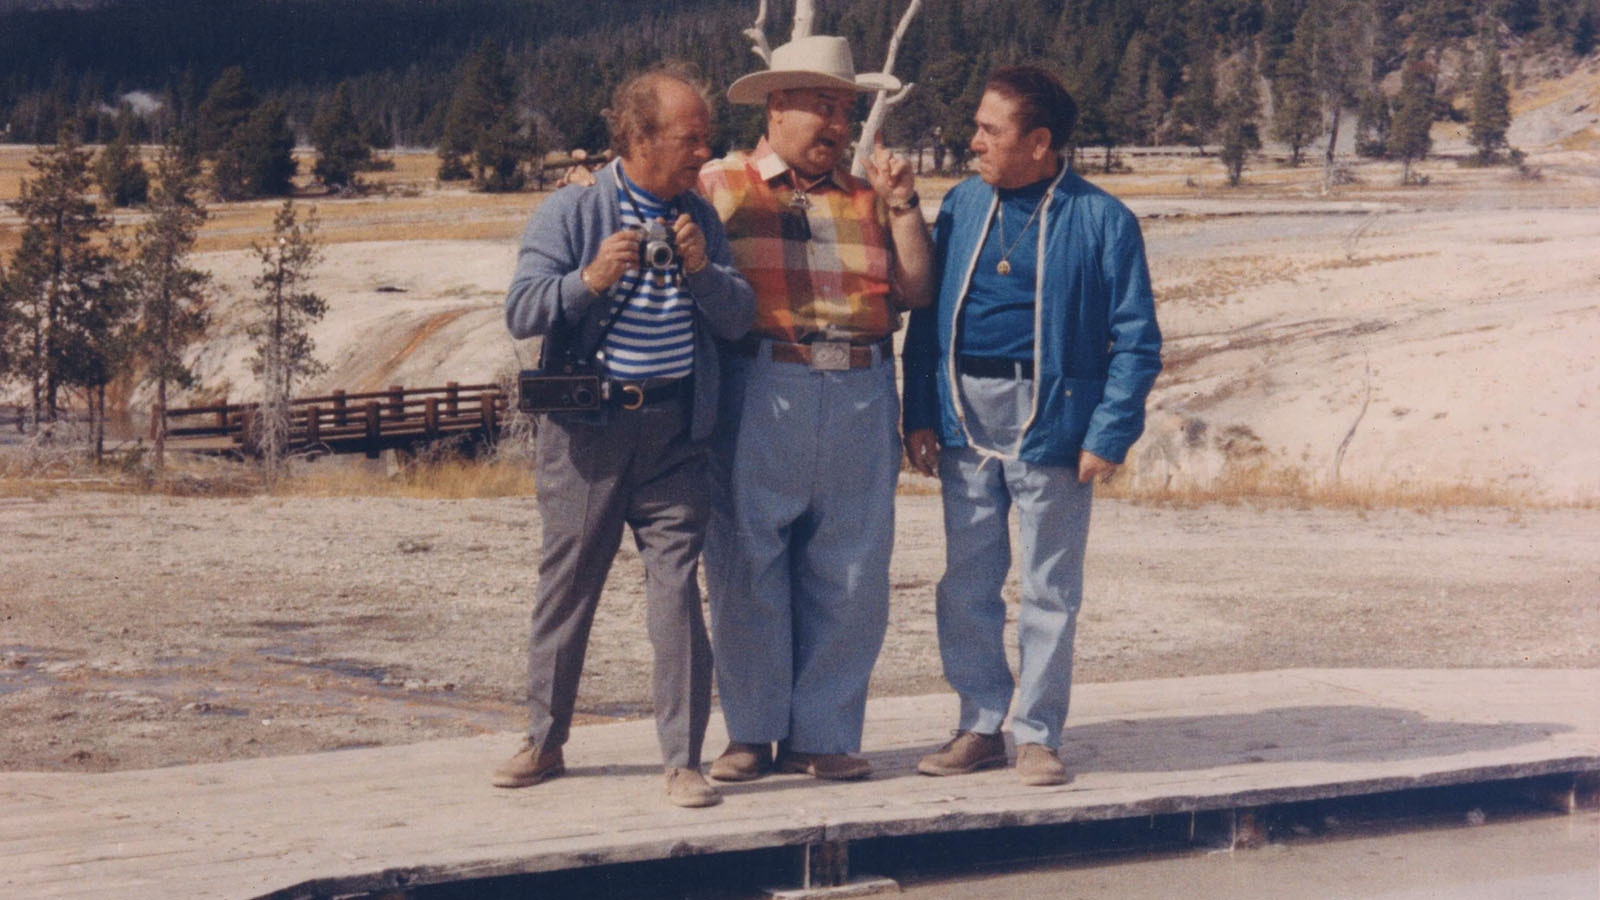 The Three Stooges while filming at Yellowstone's Old Faithful in 1969.